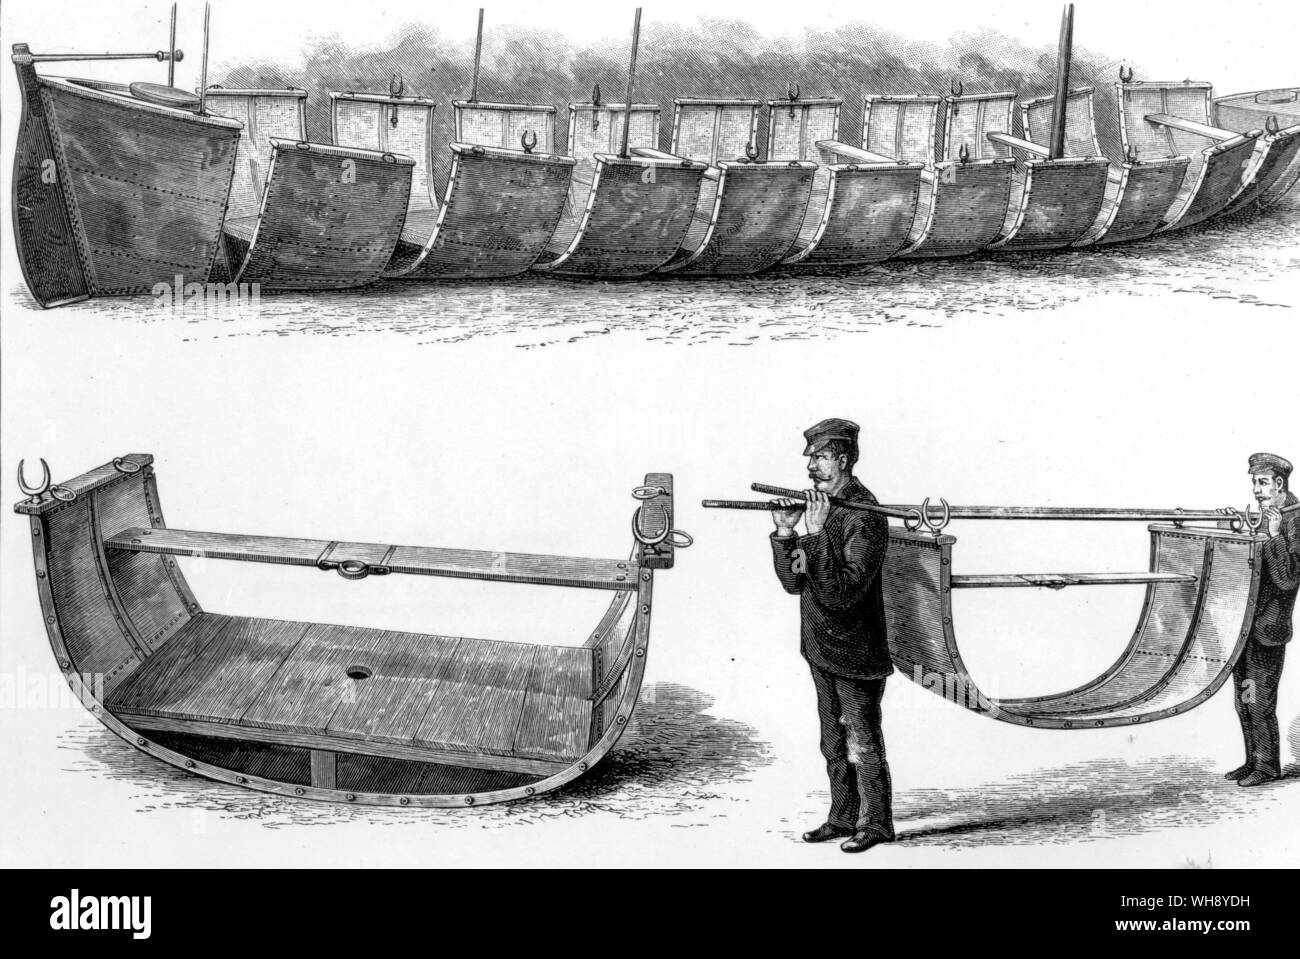 Steel boats that could be transported in sections were important items of equipment on Central African expeditions. Gordon used two and Stanley had employed this technique: 'Arriving at the first river the Advance was already jointed, and we were ferried over to the other bank in fifties, and camped.' (Stanley). Stock Photo